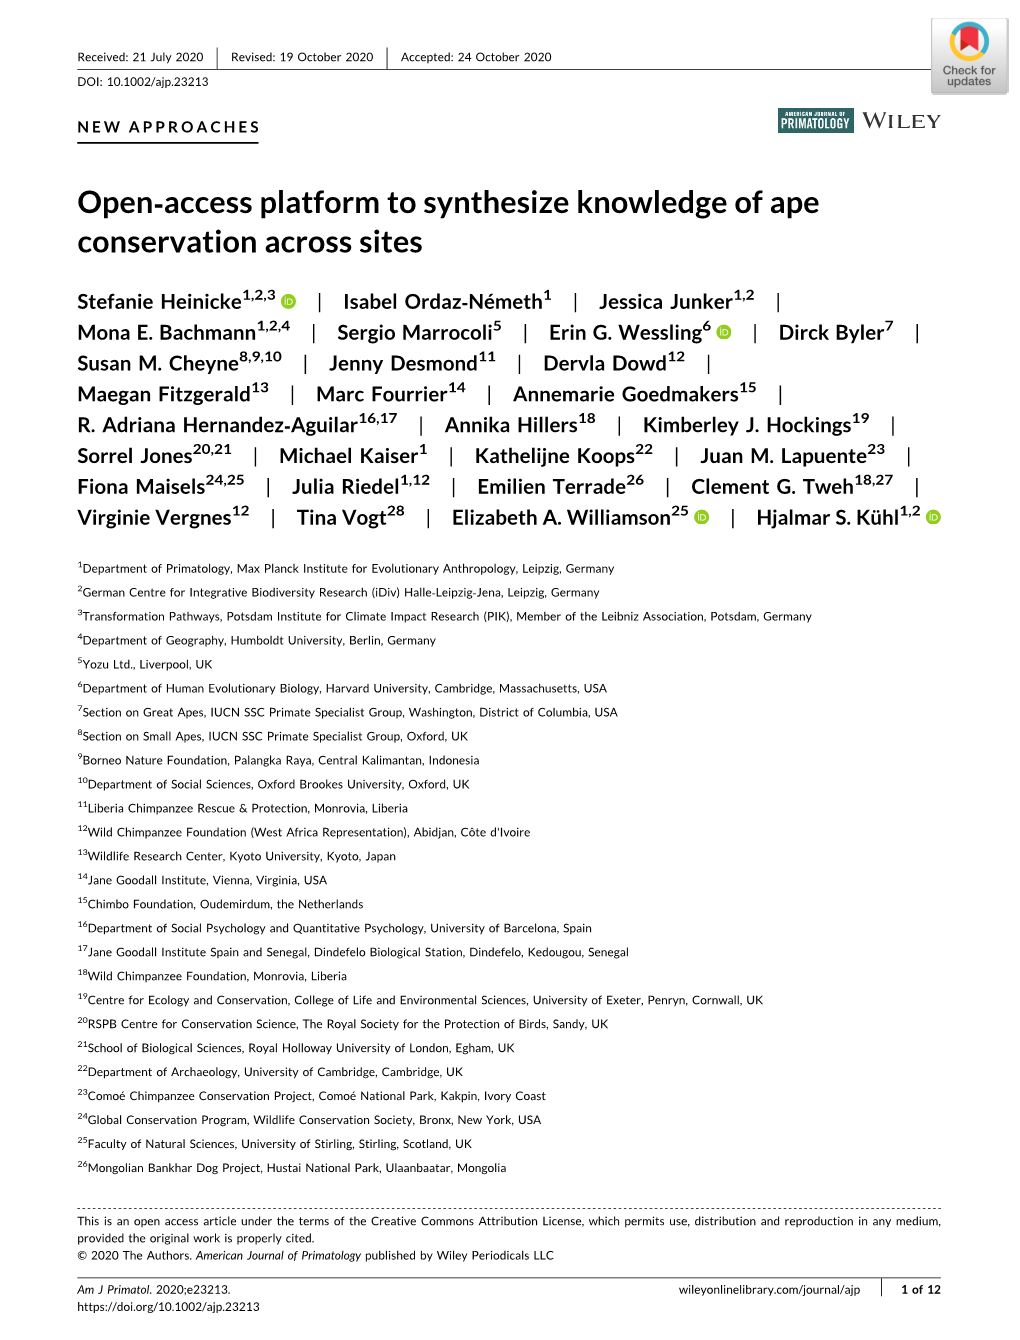 Open‐Access Platform to Synthesize Knowledge of Ape Conservation Across Sites